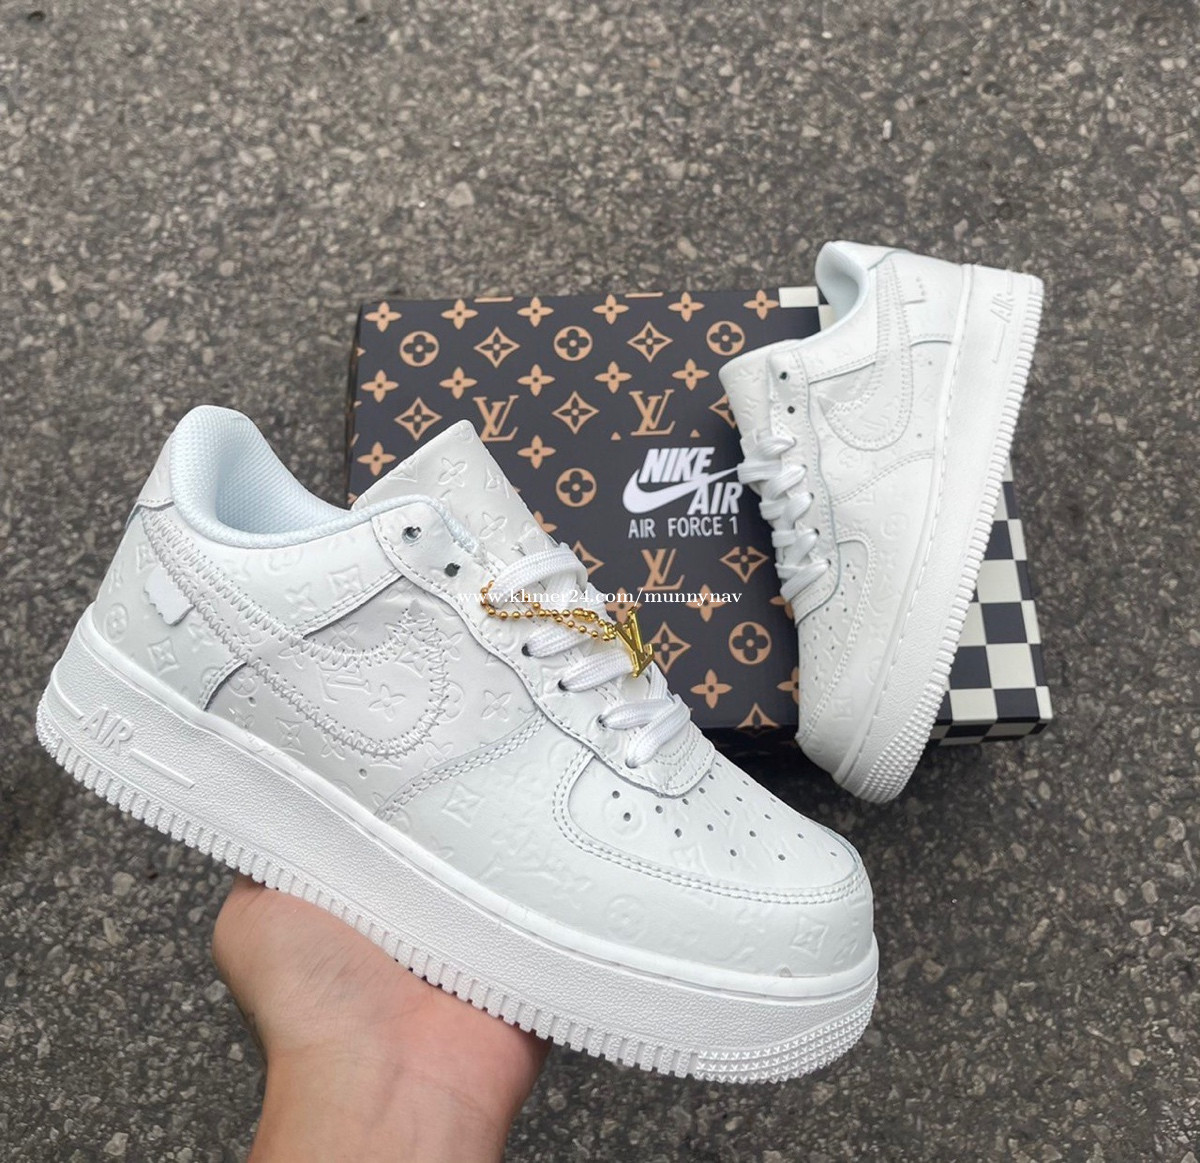 Nike Air Force 1 High SE White 2022. Size 7Y✅✅